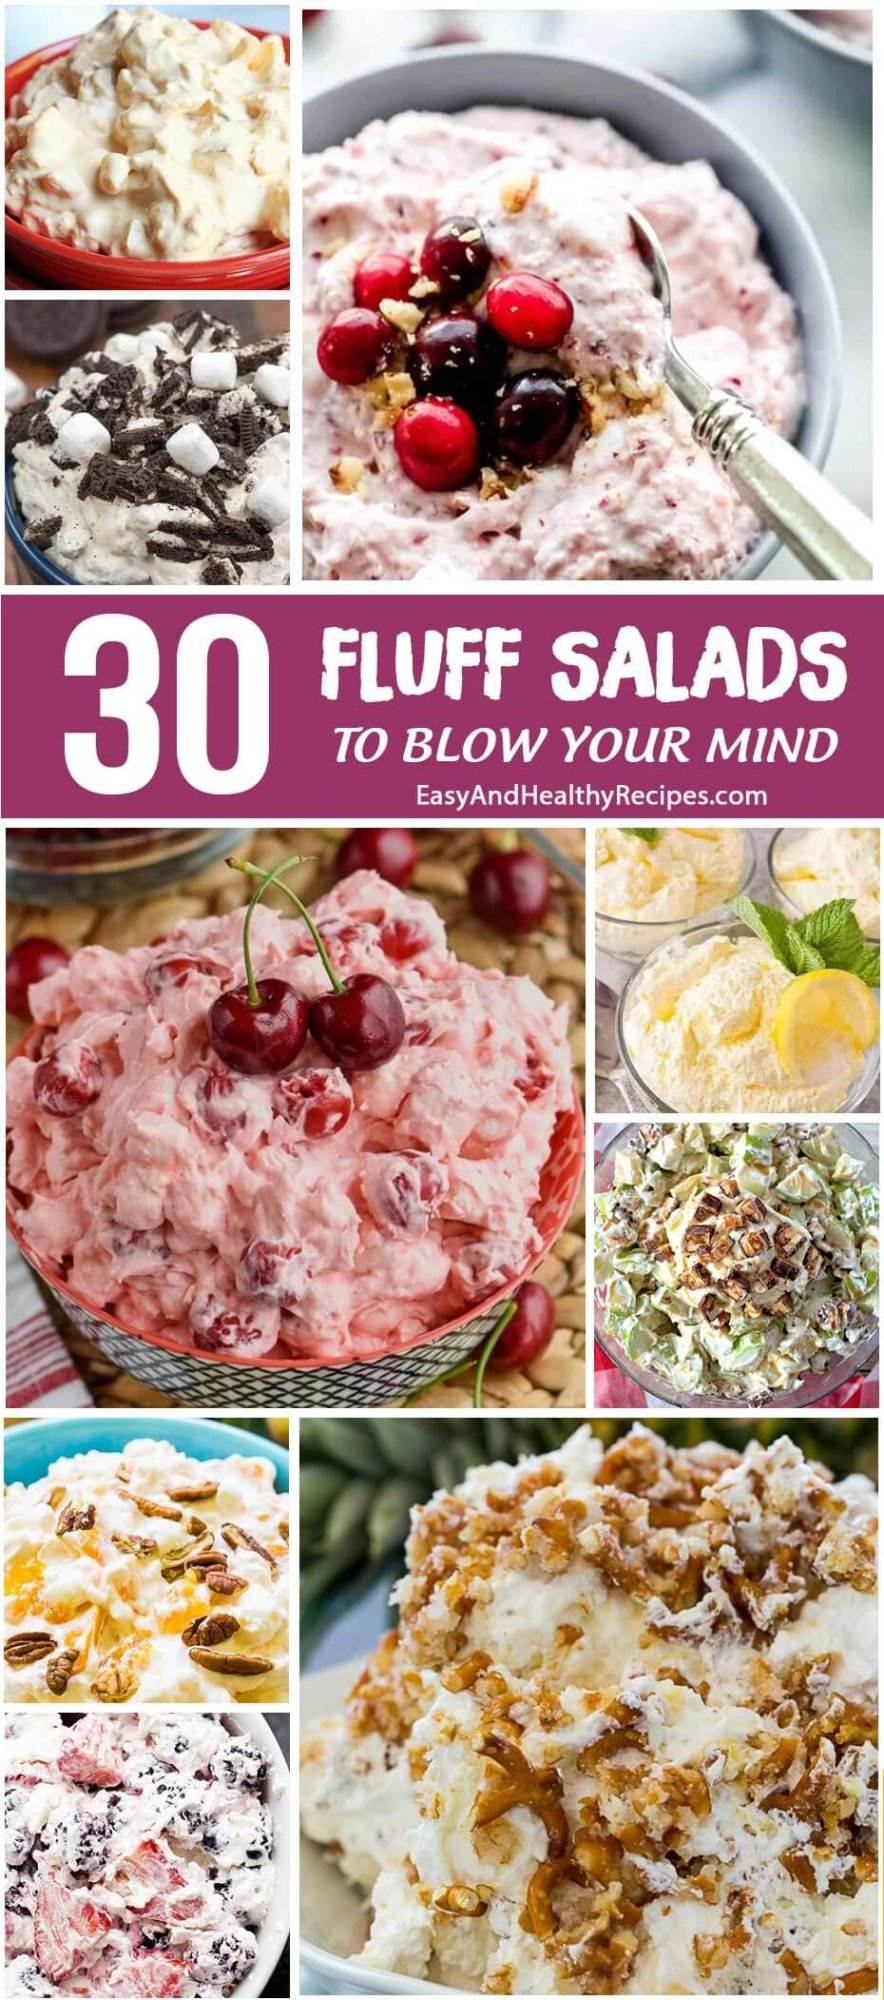 30 Fluff Salads To Blow Your Mind